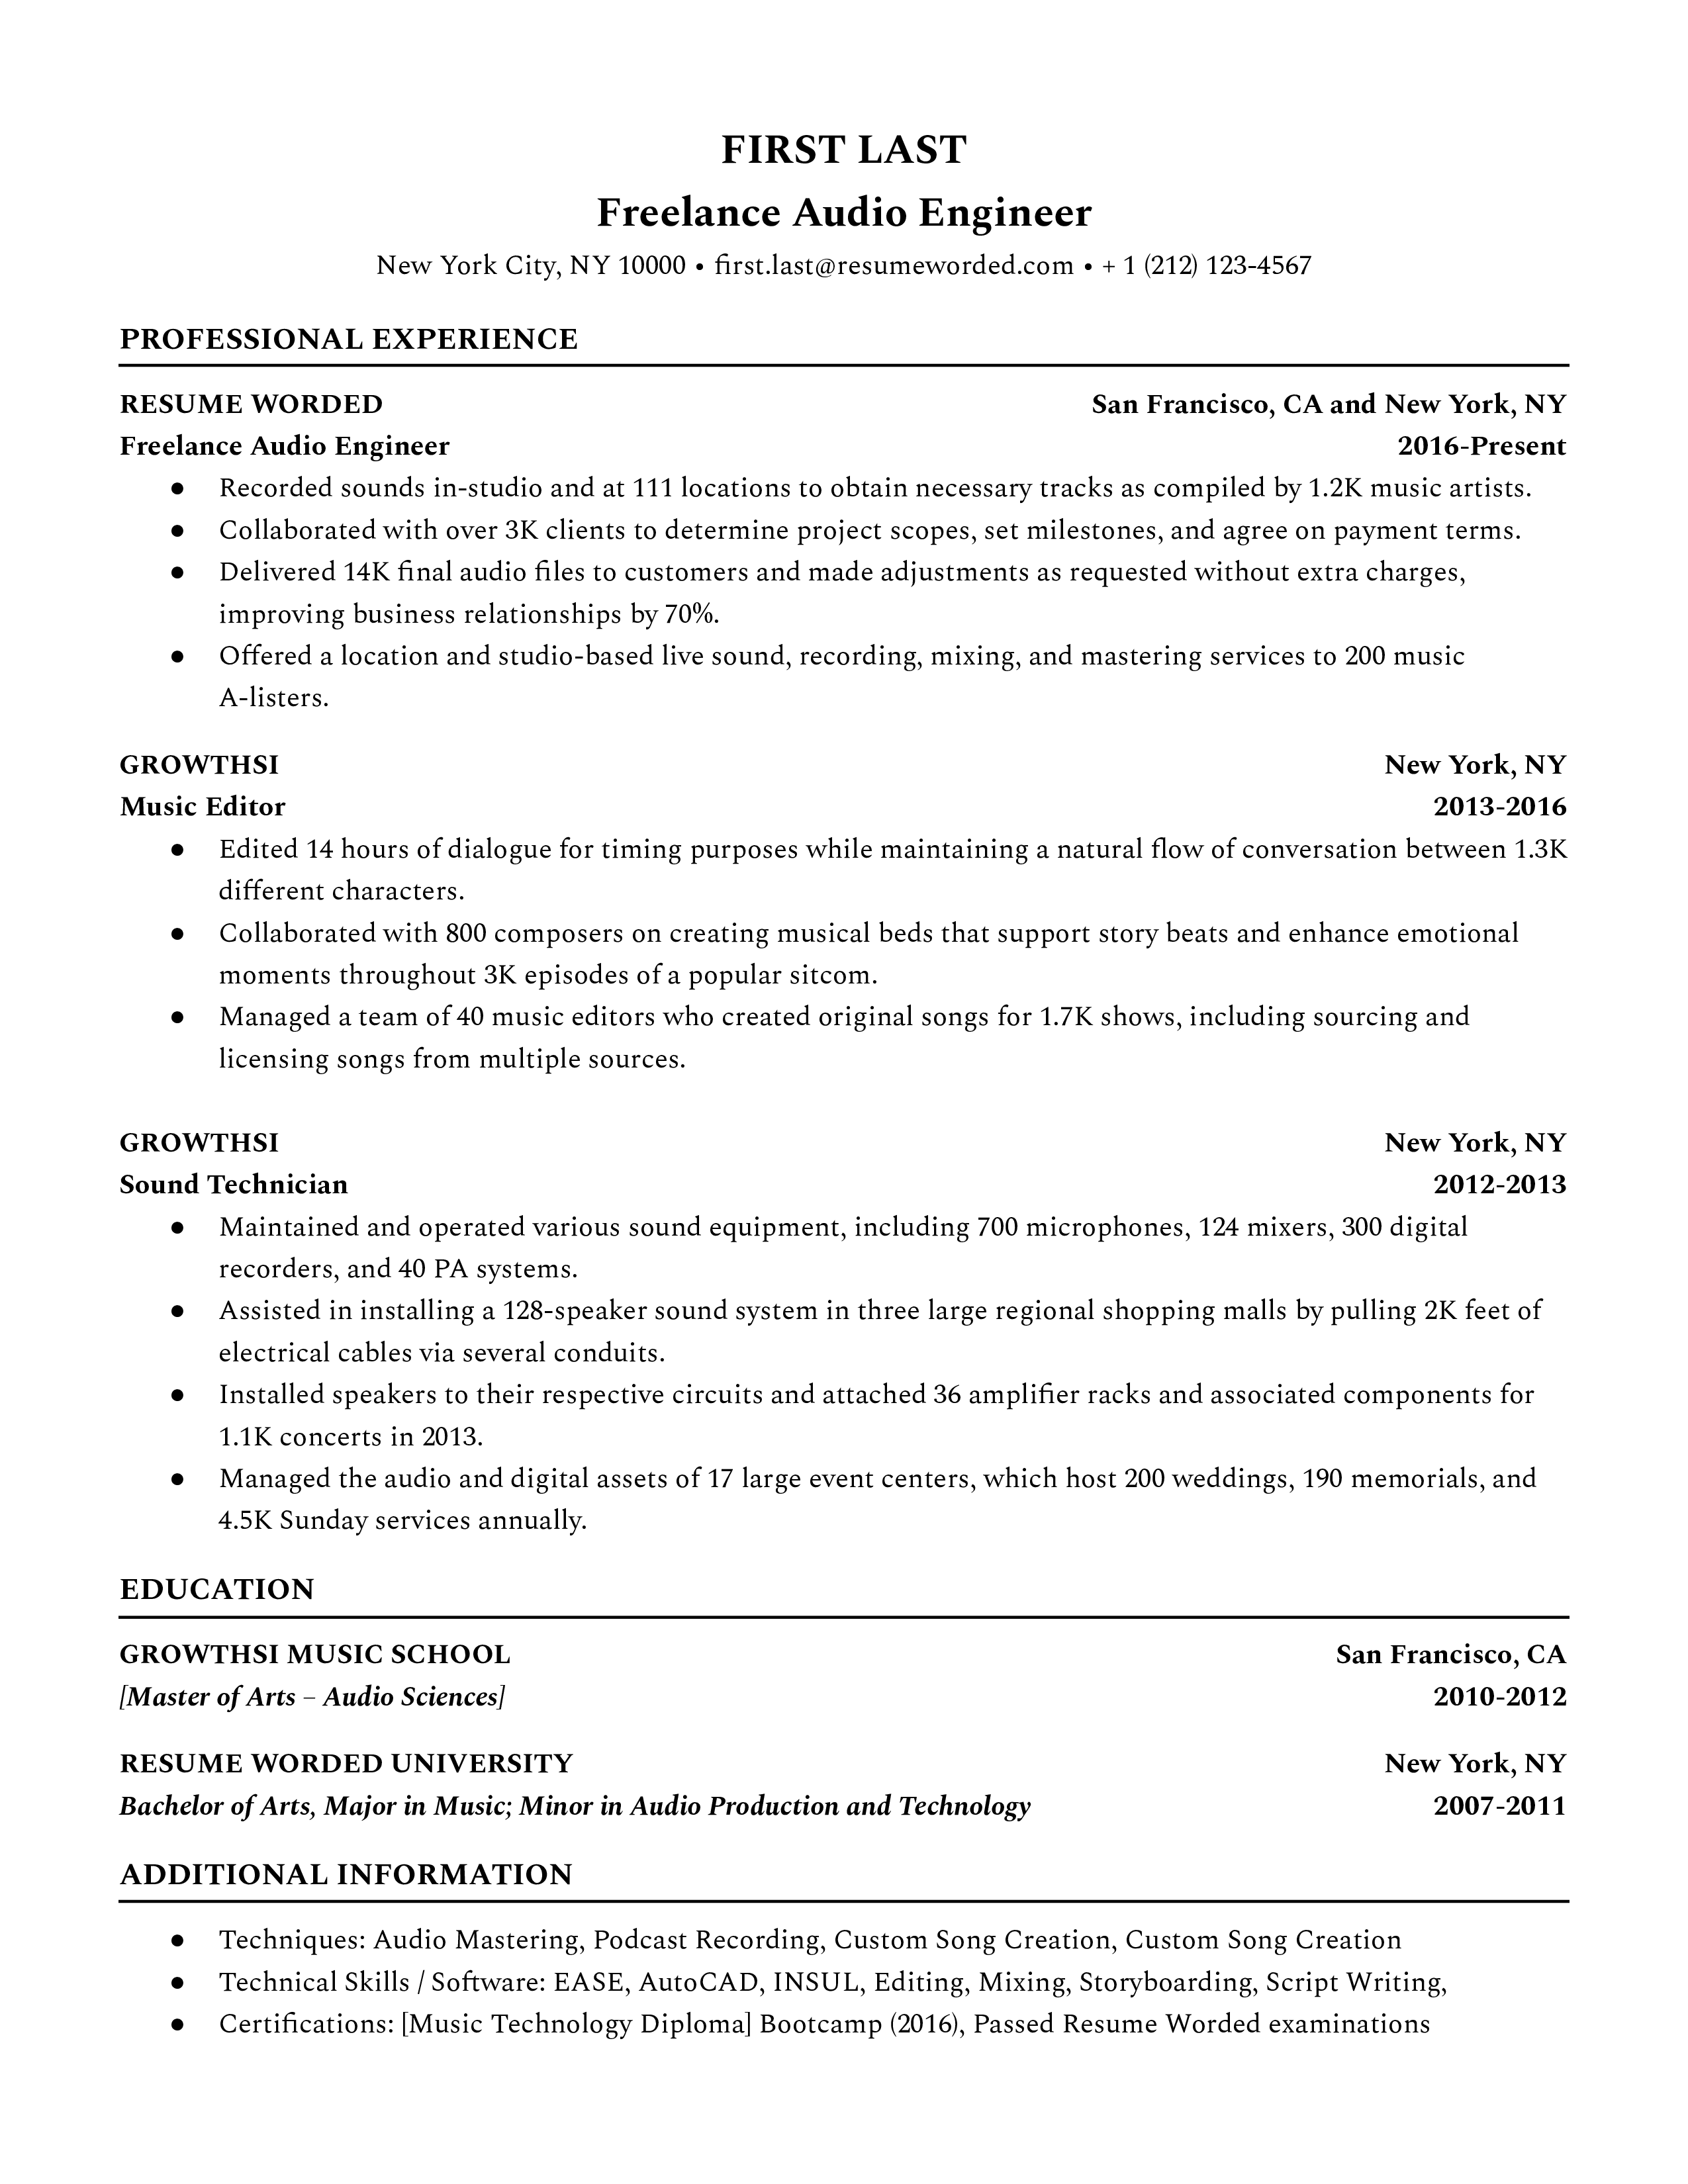 A freelance audio engineer resume sample that highlights the applicant’s impressive quantifiable experience.